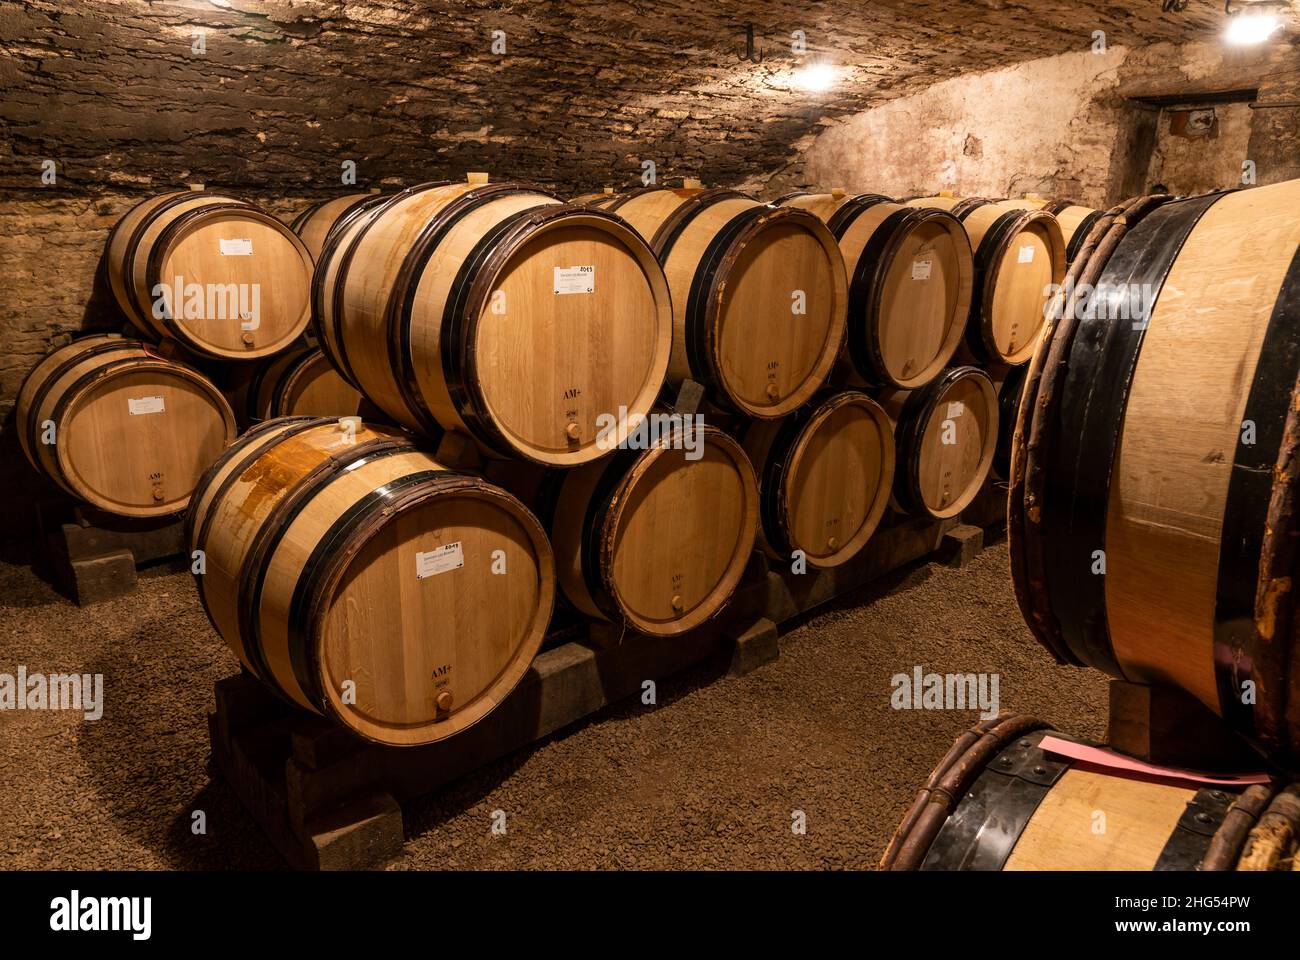 Monthelie, France - June 30, 2020: Wine Barrels in the cellar of the domaine Boussy, Monthalie, burgundy, France. Stock Photo